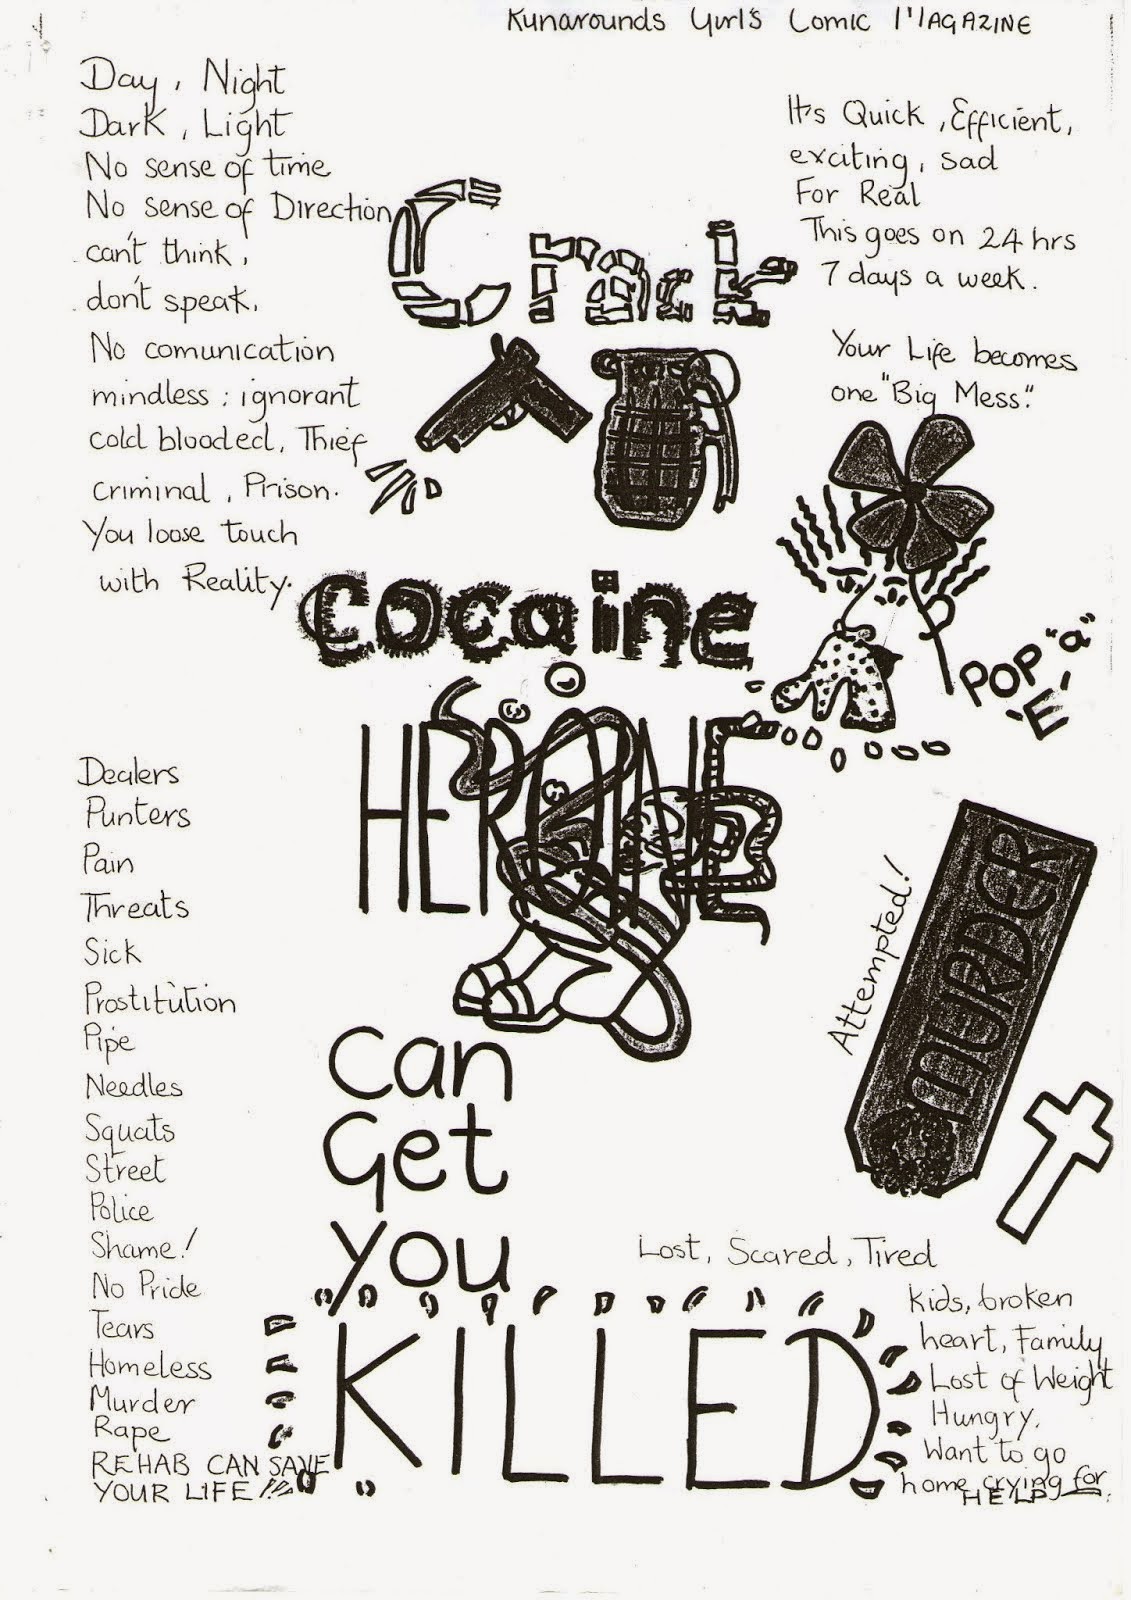 Run Arounds comic Crack Cocaine & Heroin can get you killed